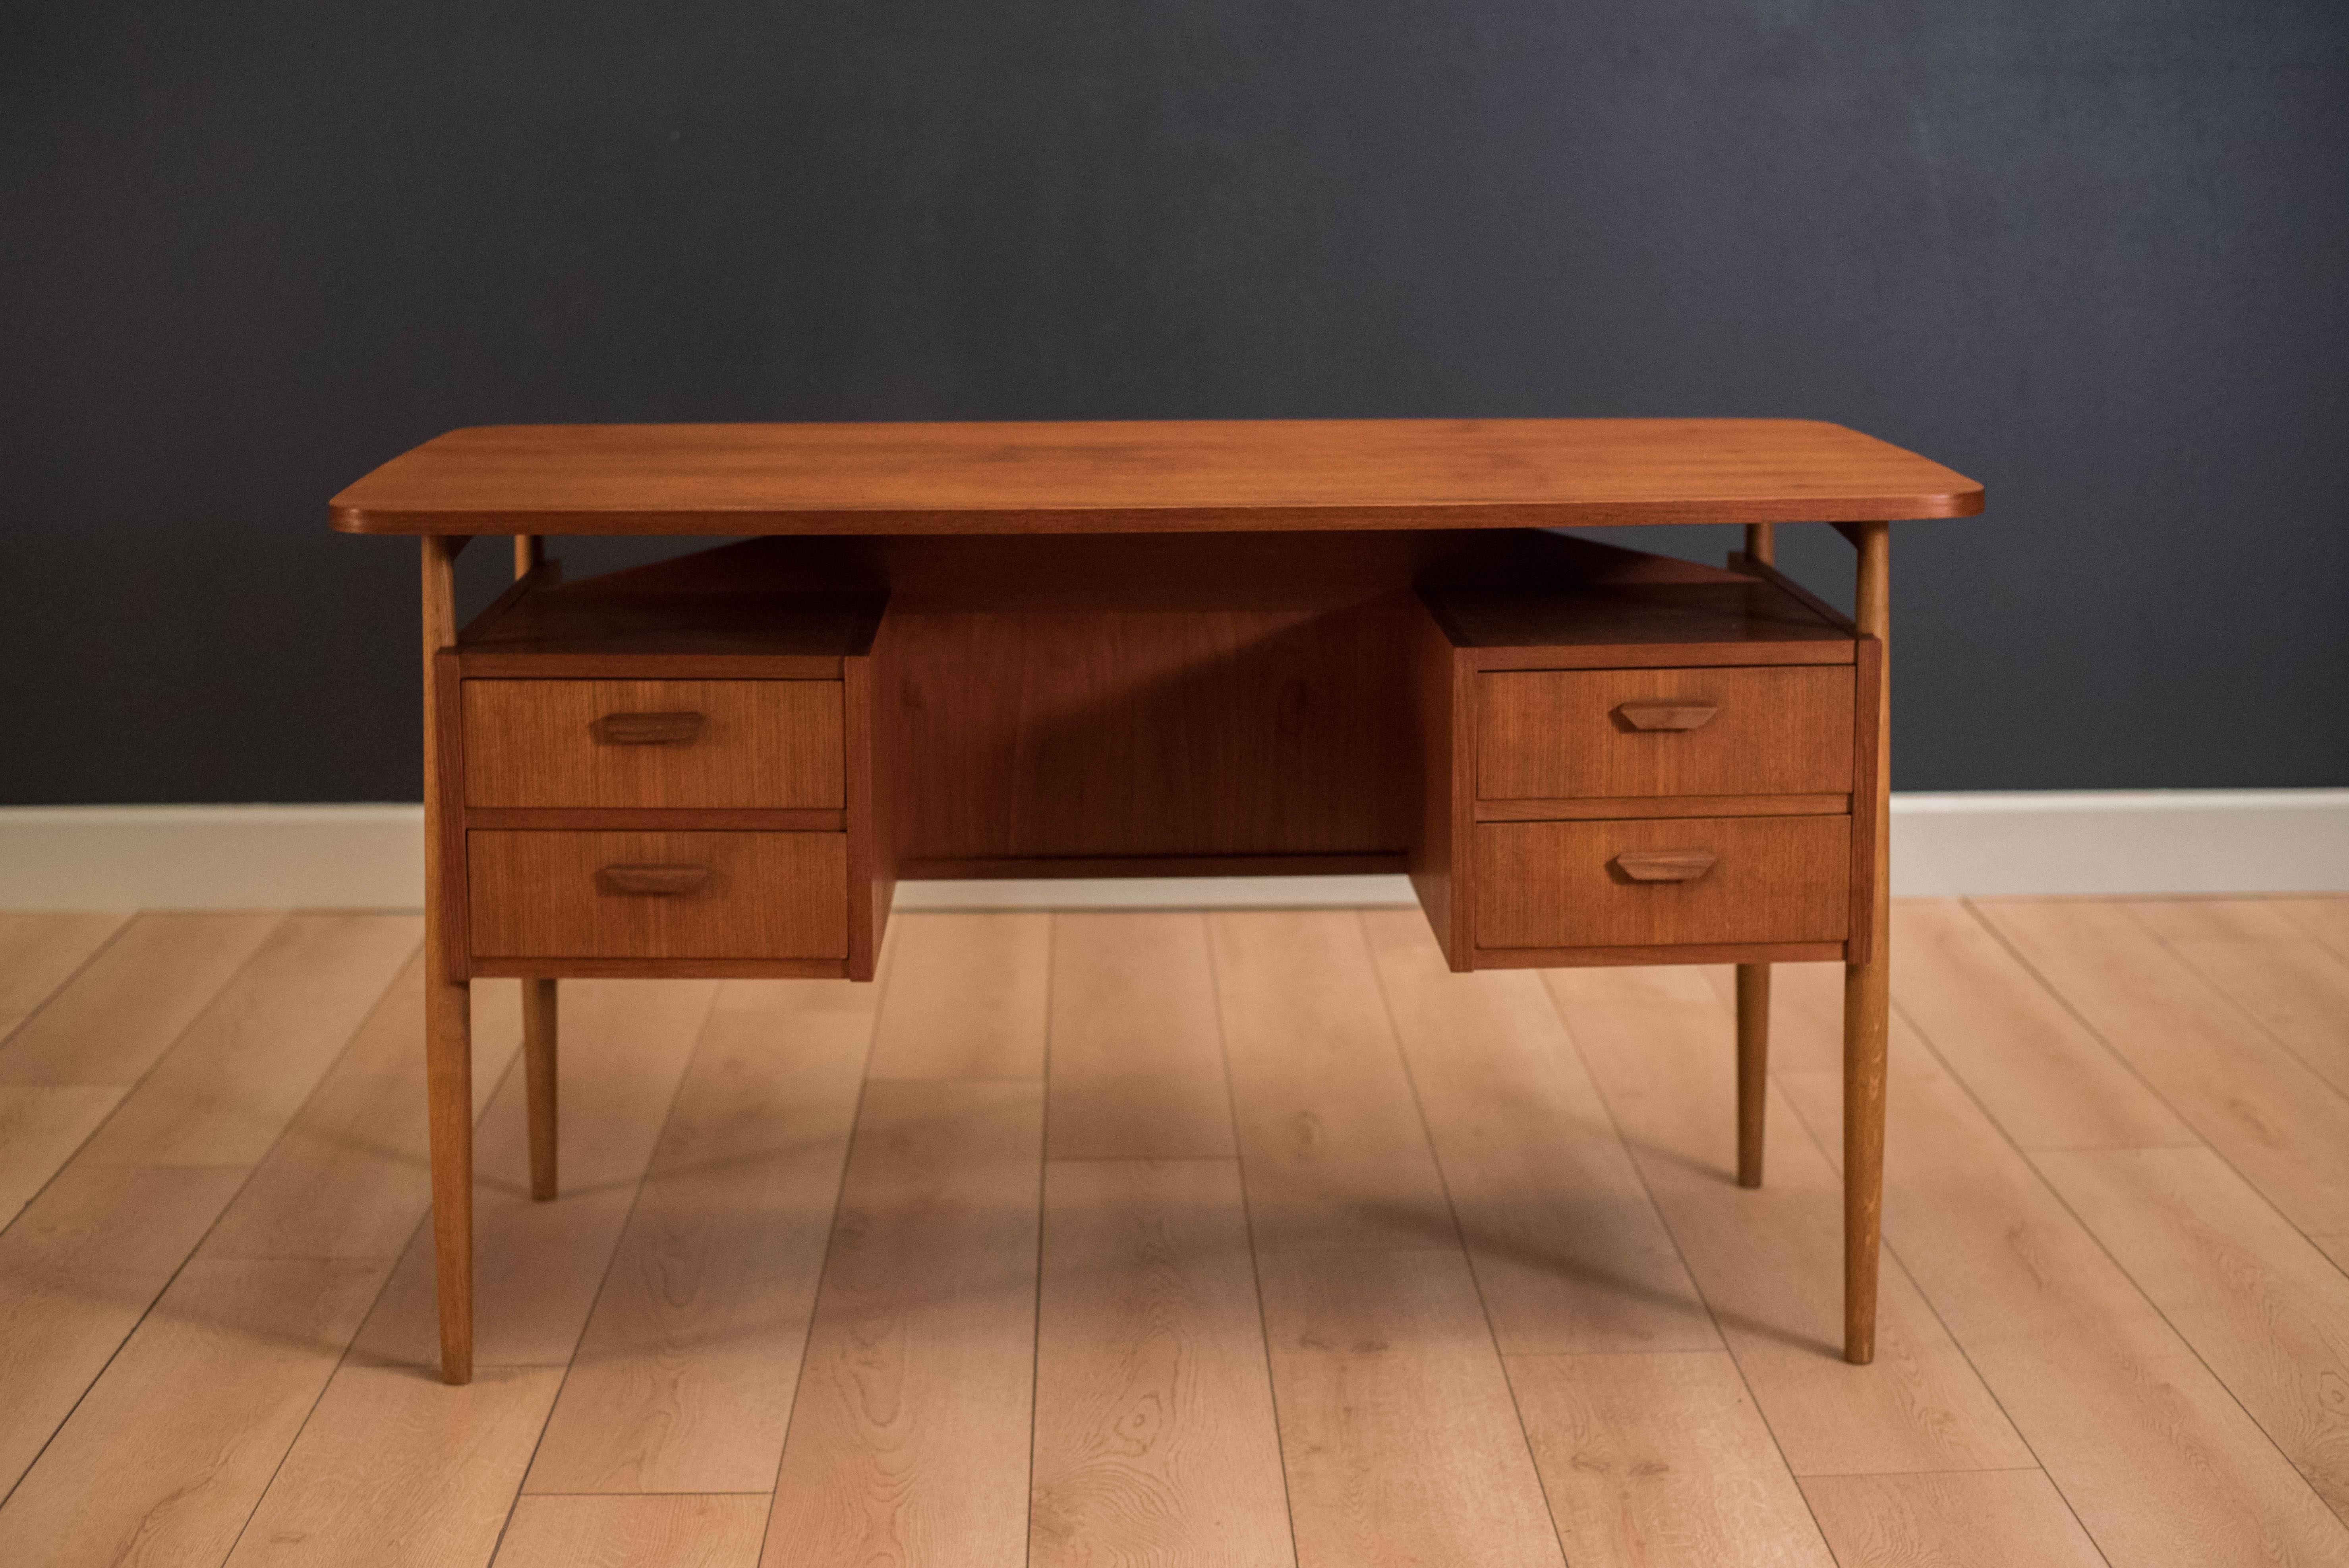 Mid-Century desk by Gunnar Nielsen Tibergaard in teak. This piece features a floating desk top with external oak legs. Includes four dovetailed drawers and an open bookshelf storage which can be displayed from any angle.